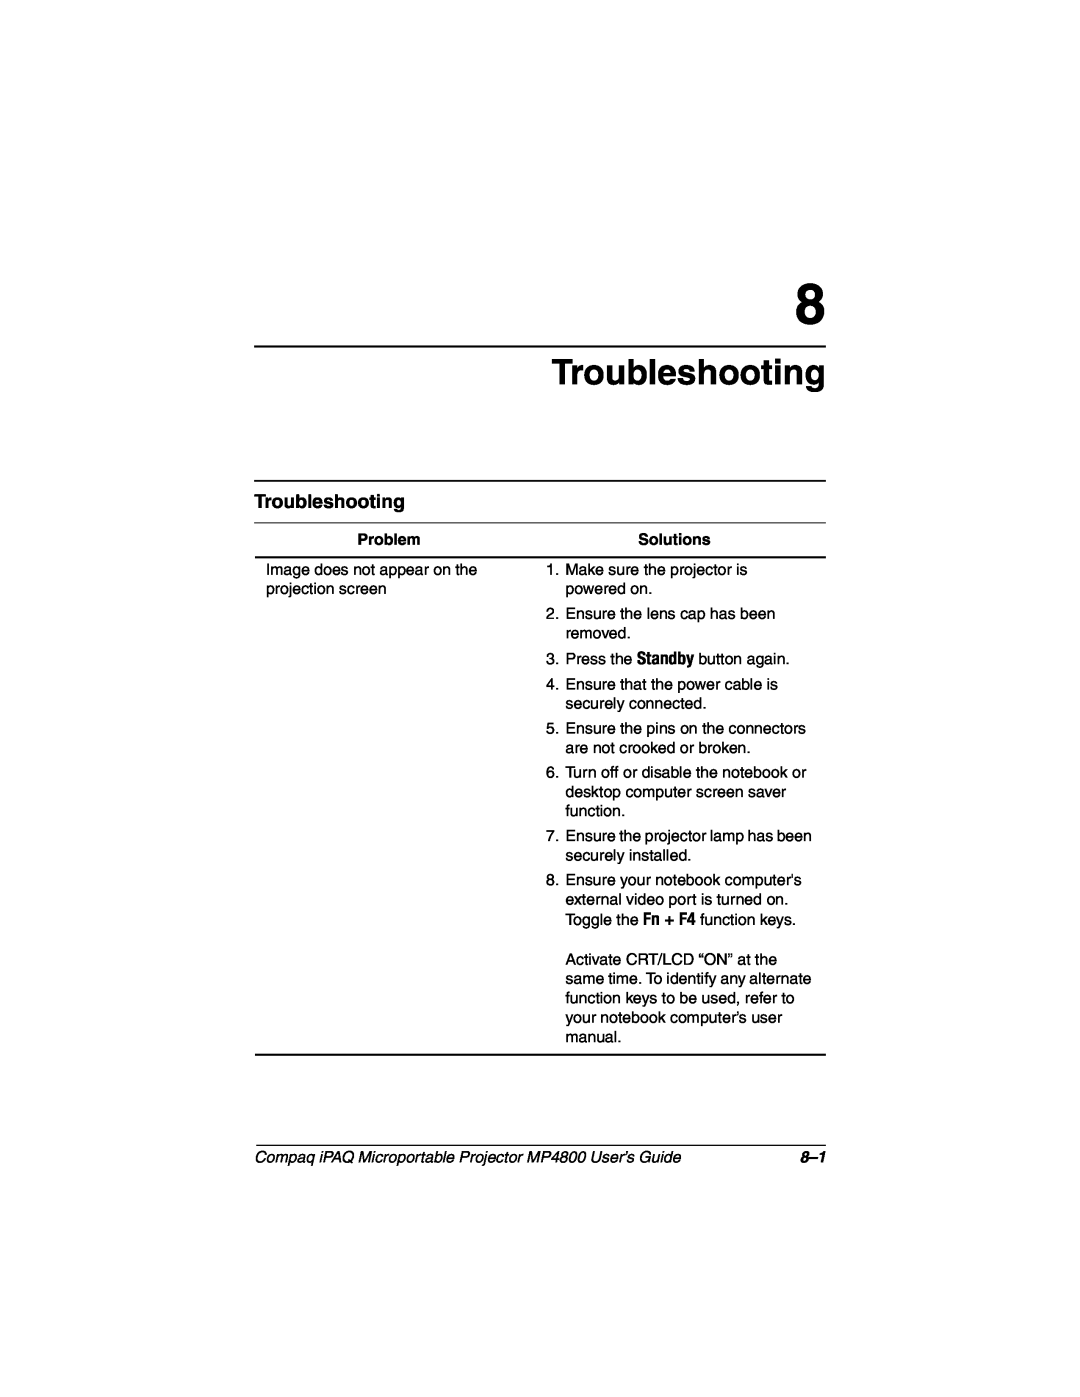 Compaq manual Troubleshooting, Compaq iPAQ Microportable Projector MP4800 User’s Guide 